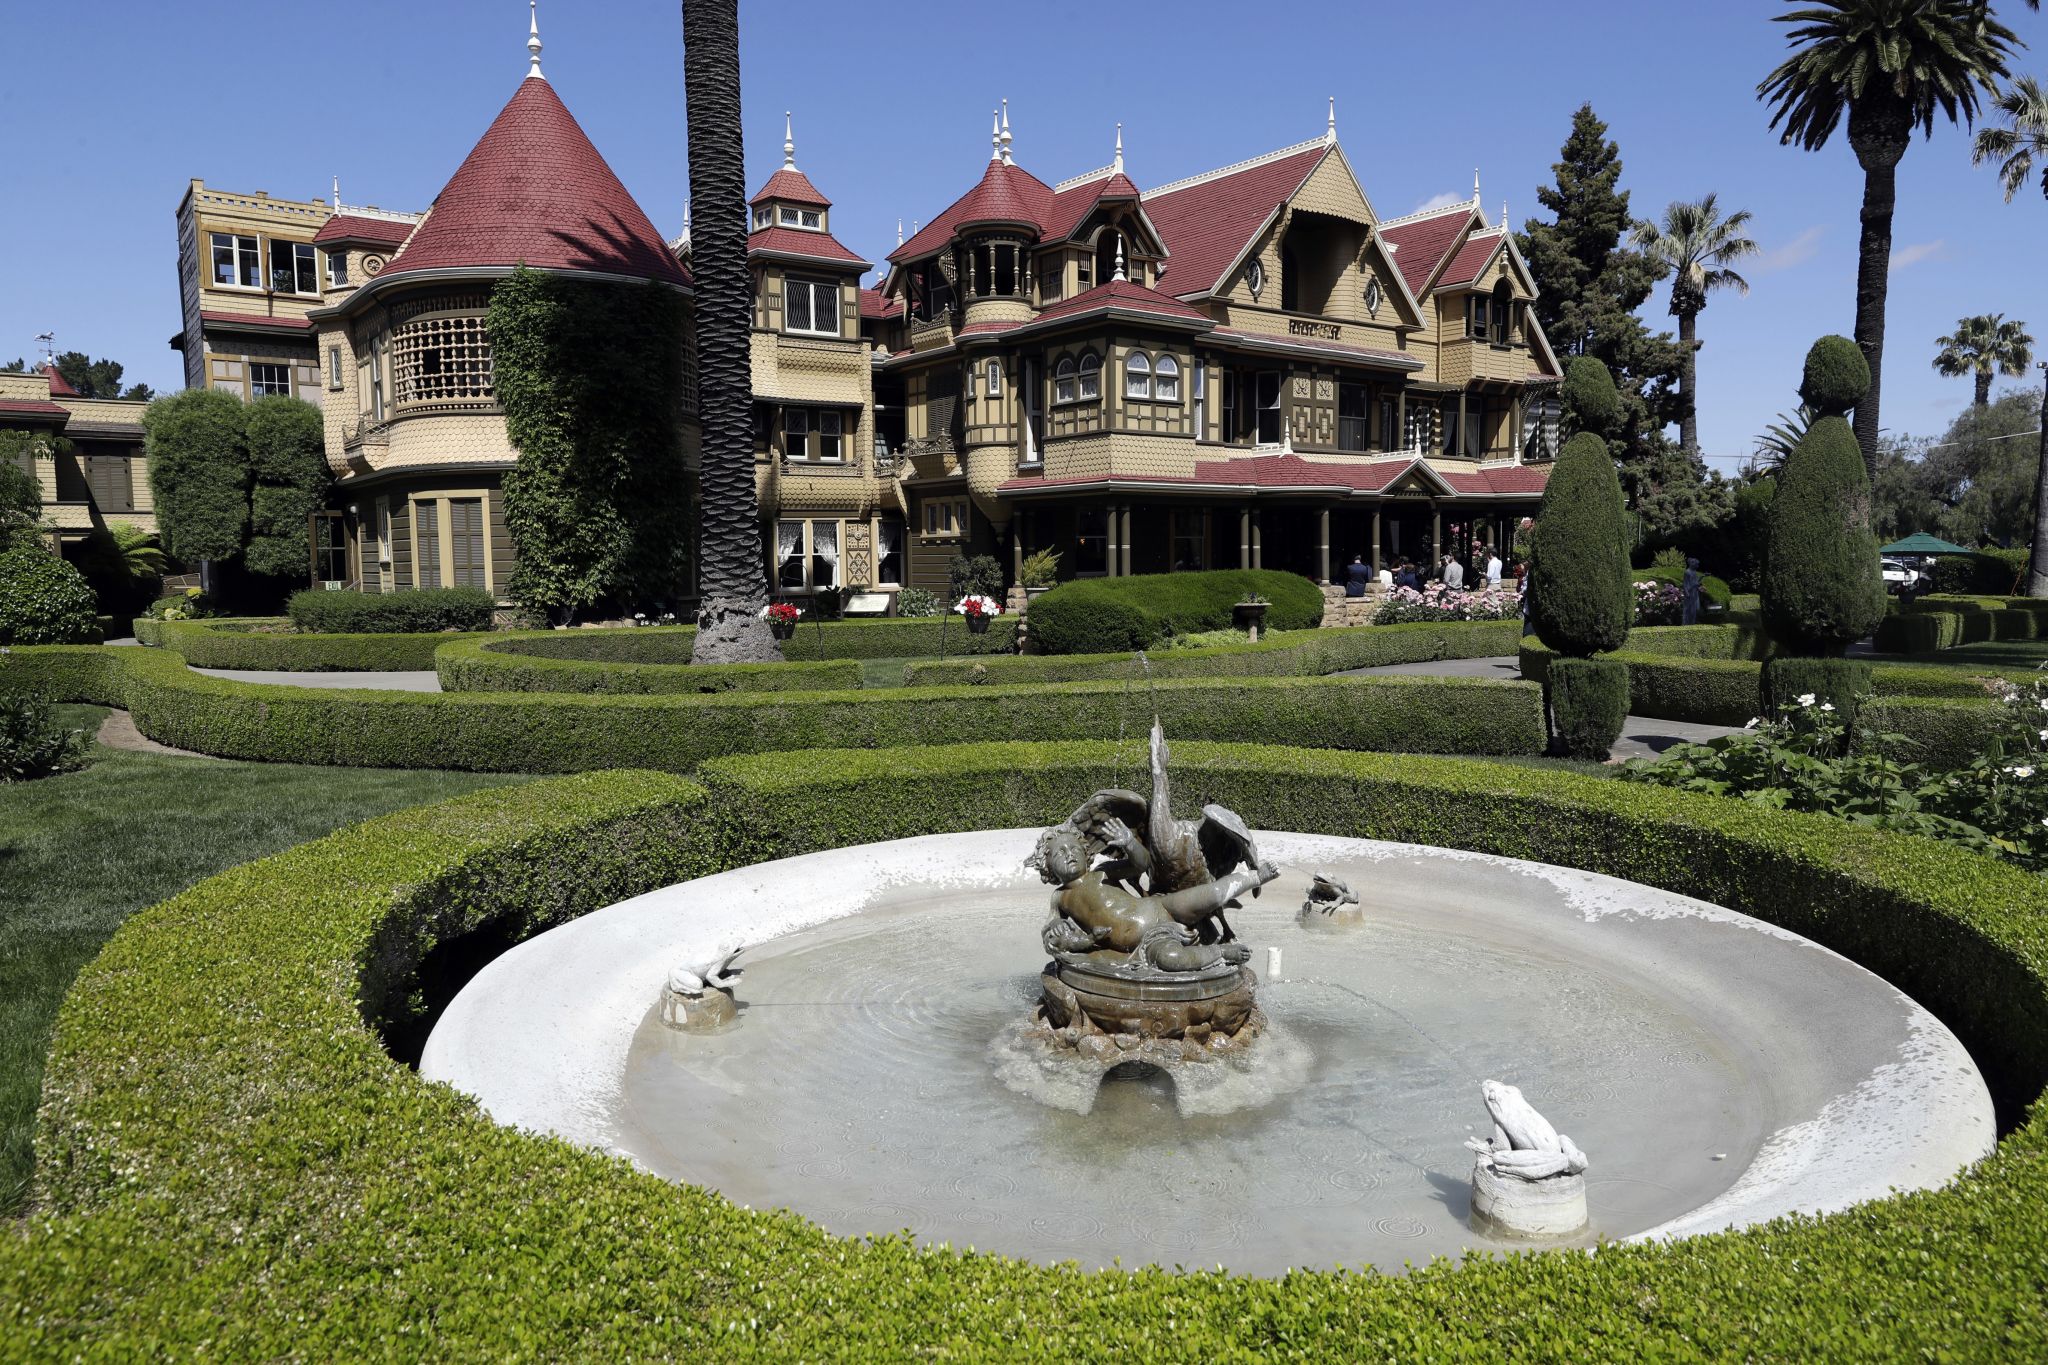 'San Jose has weird house': How the Winchester Mystery House was reported on in the ...2048 x 1365